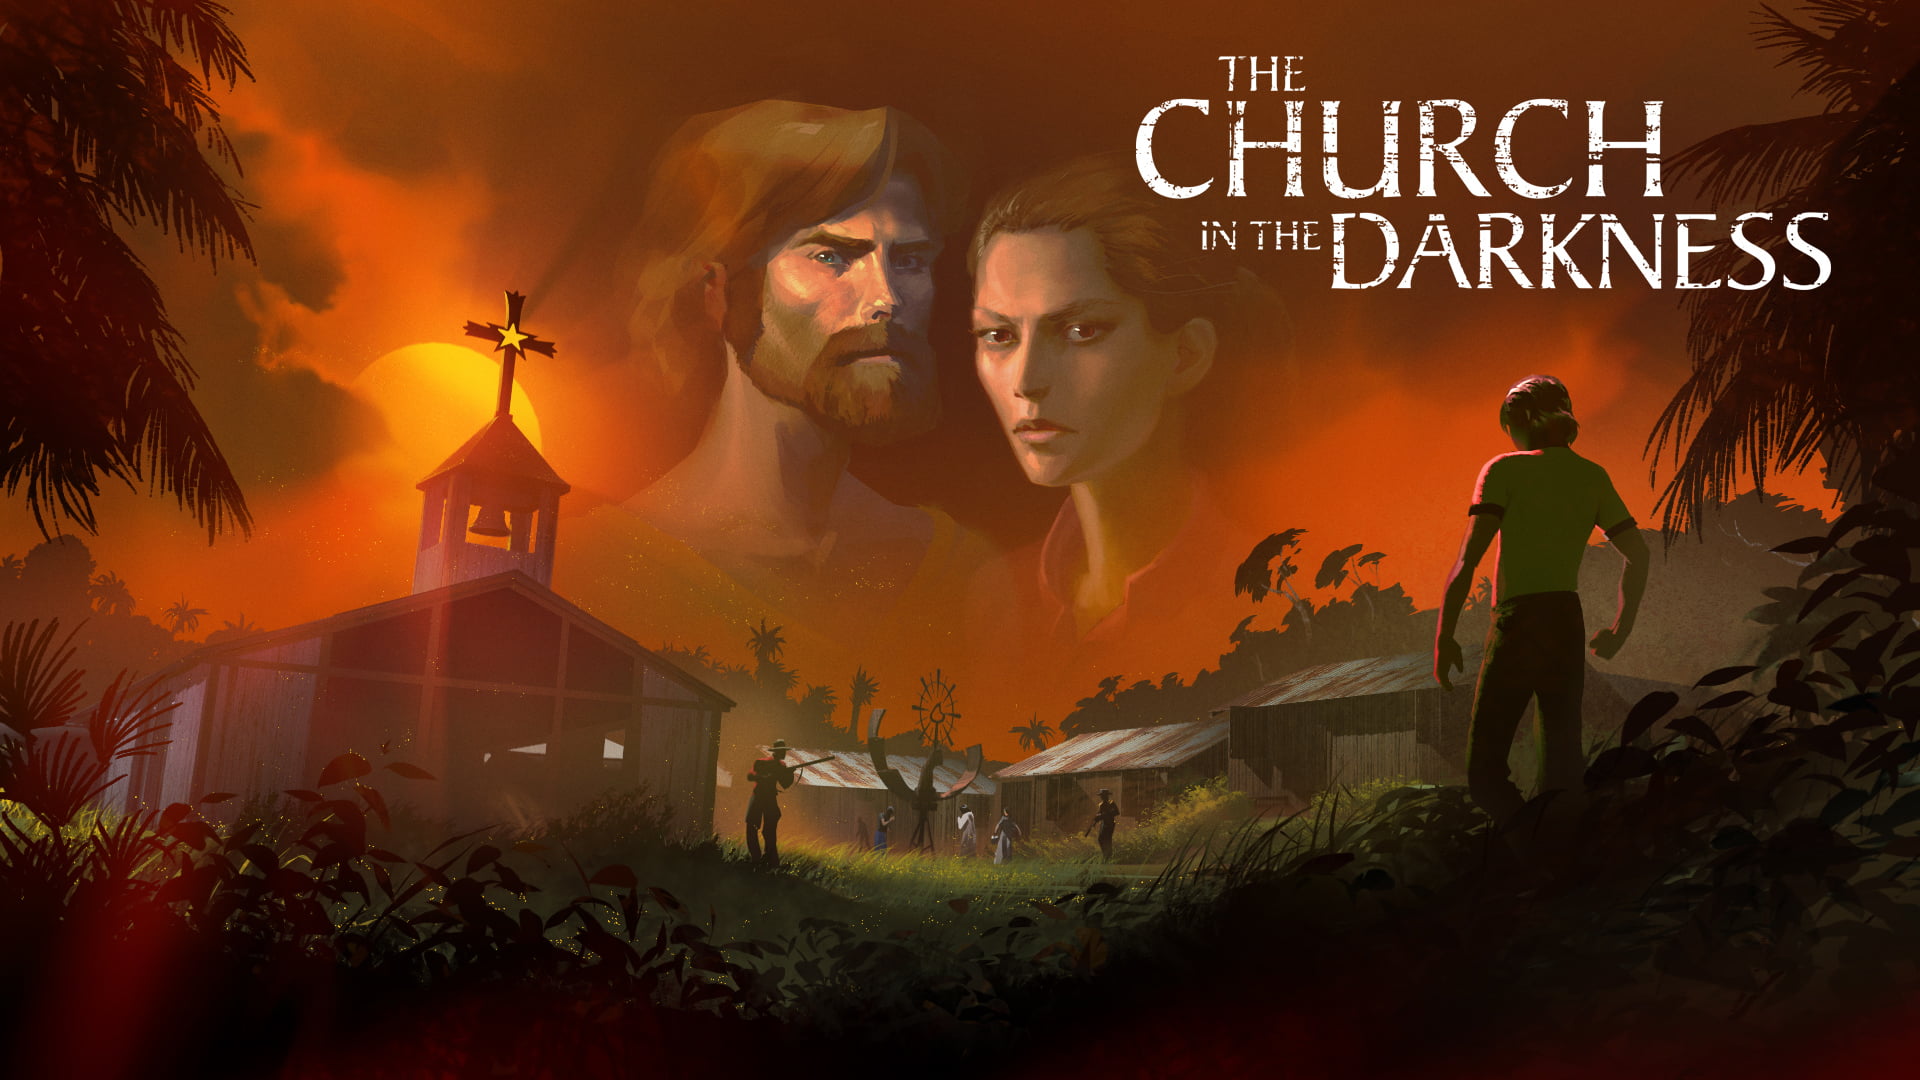 The church in the darkness - review | the church in the darkness | married games análises | the church in the darkness